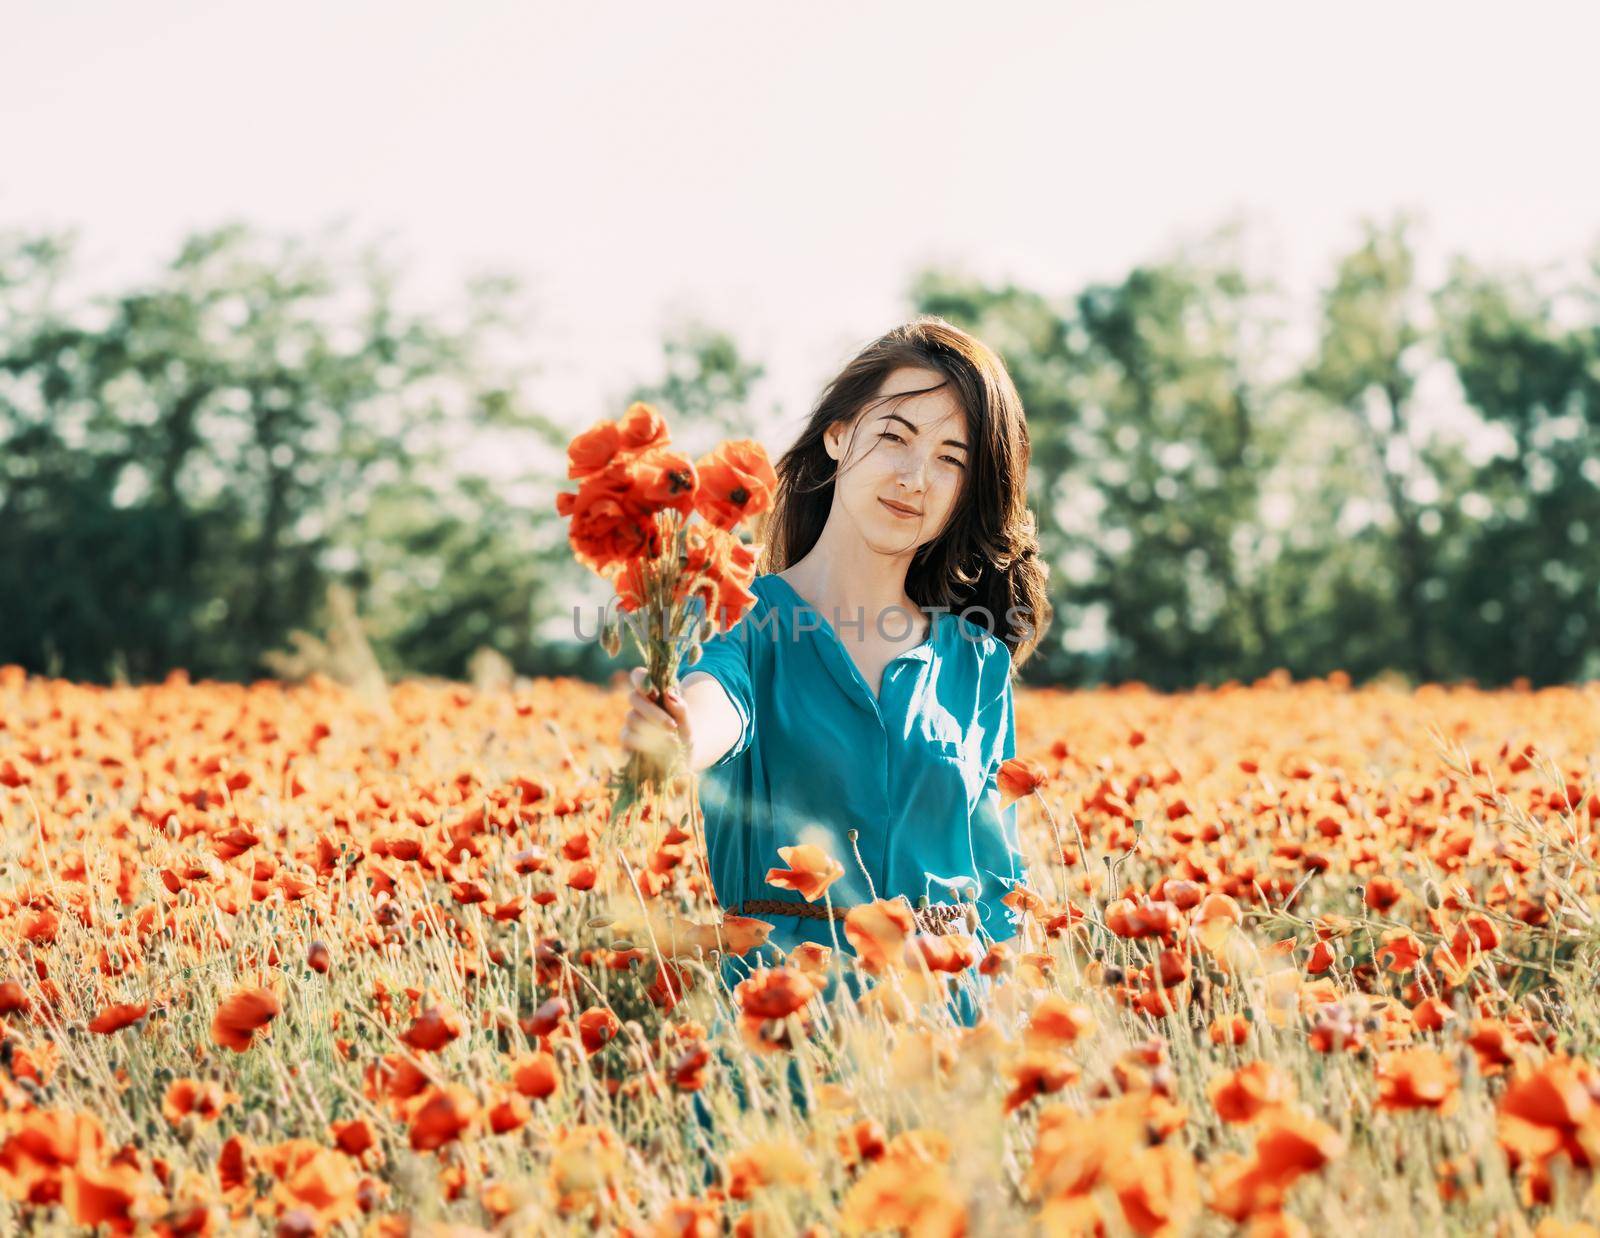 Smiling beautiful young woman standing with bouquet of poppies in flower field, looking at camera.